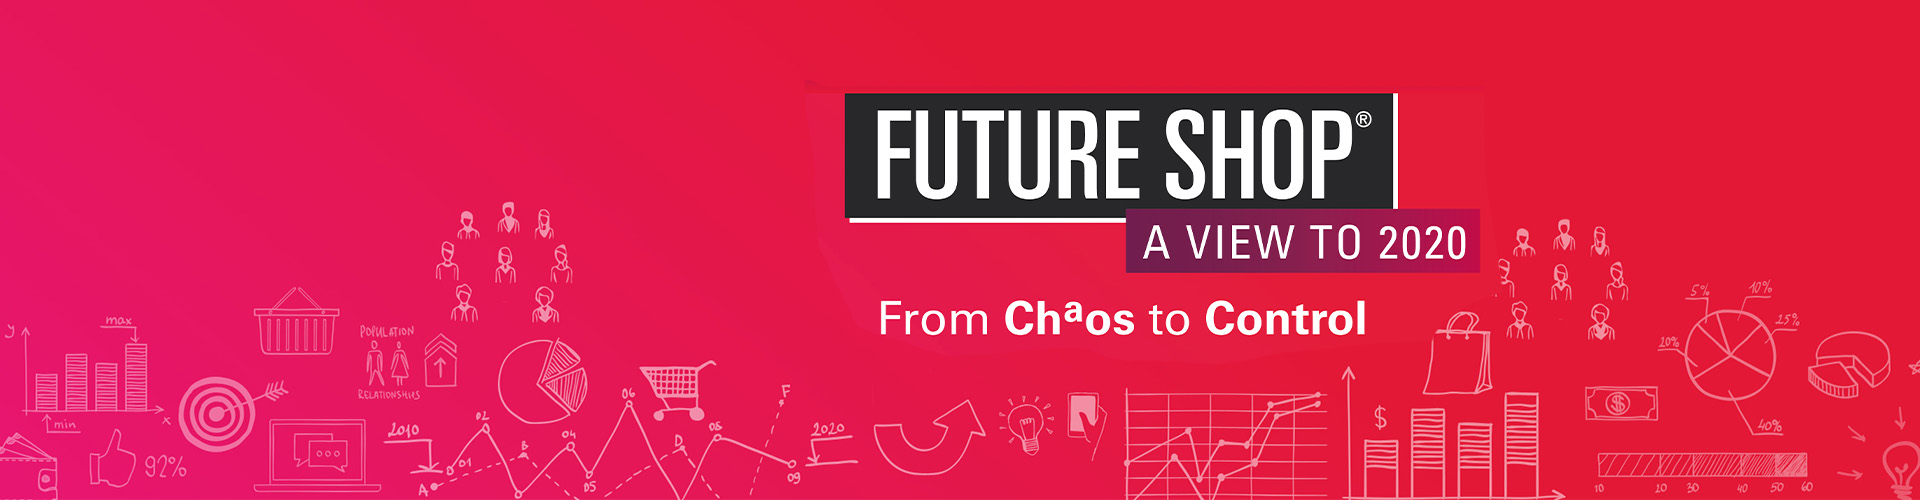 Future Shop® 2021: From Chaos to Control Report Banner featuring red and pink background, title, and icons along the bottom